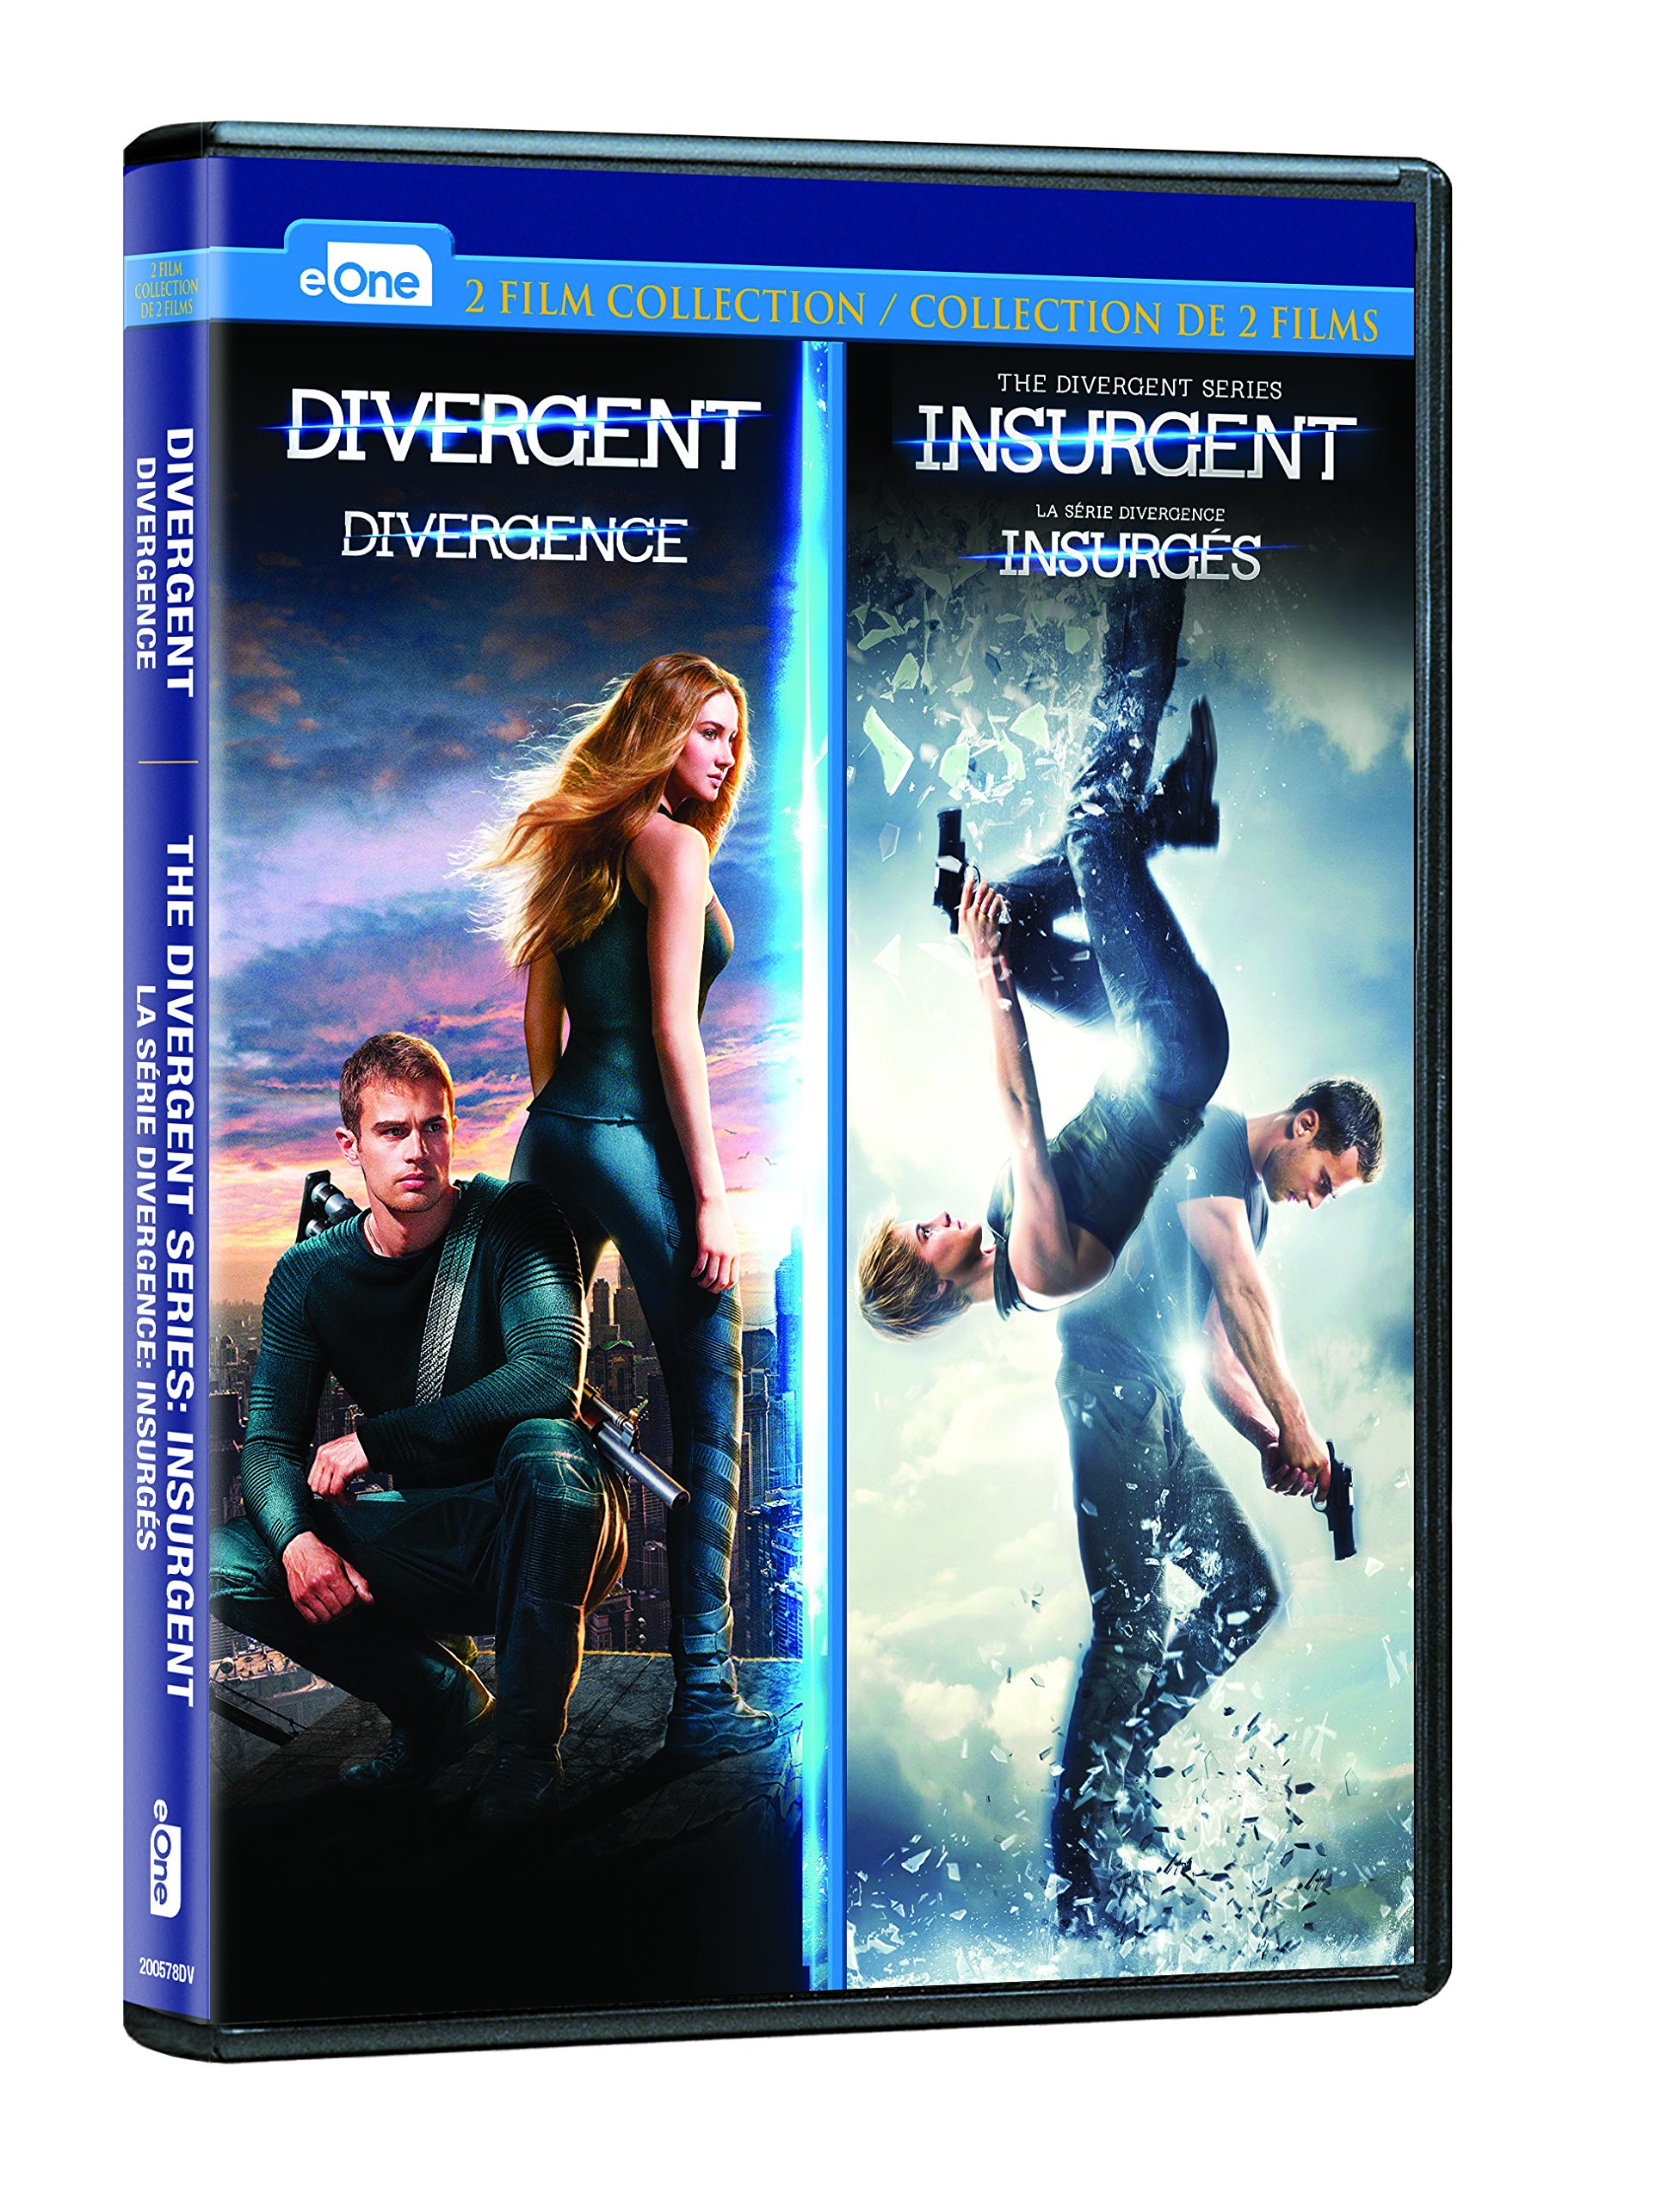 The Divergent Series on MovieShack